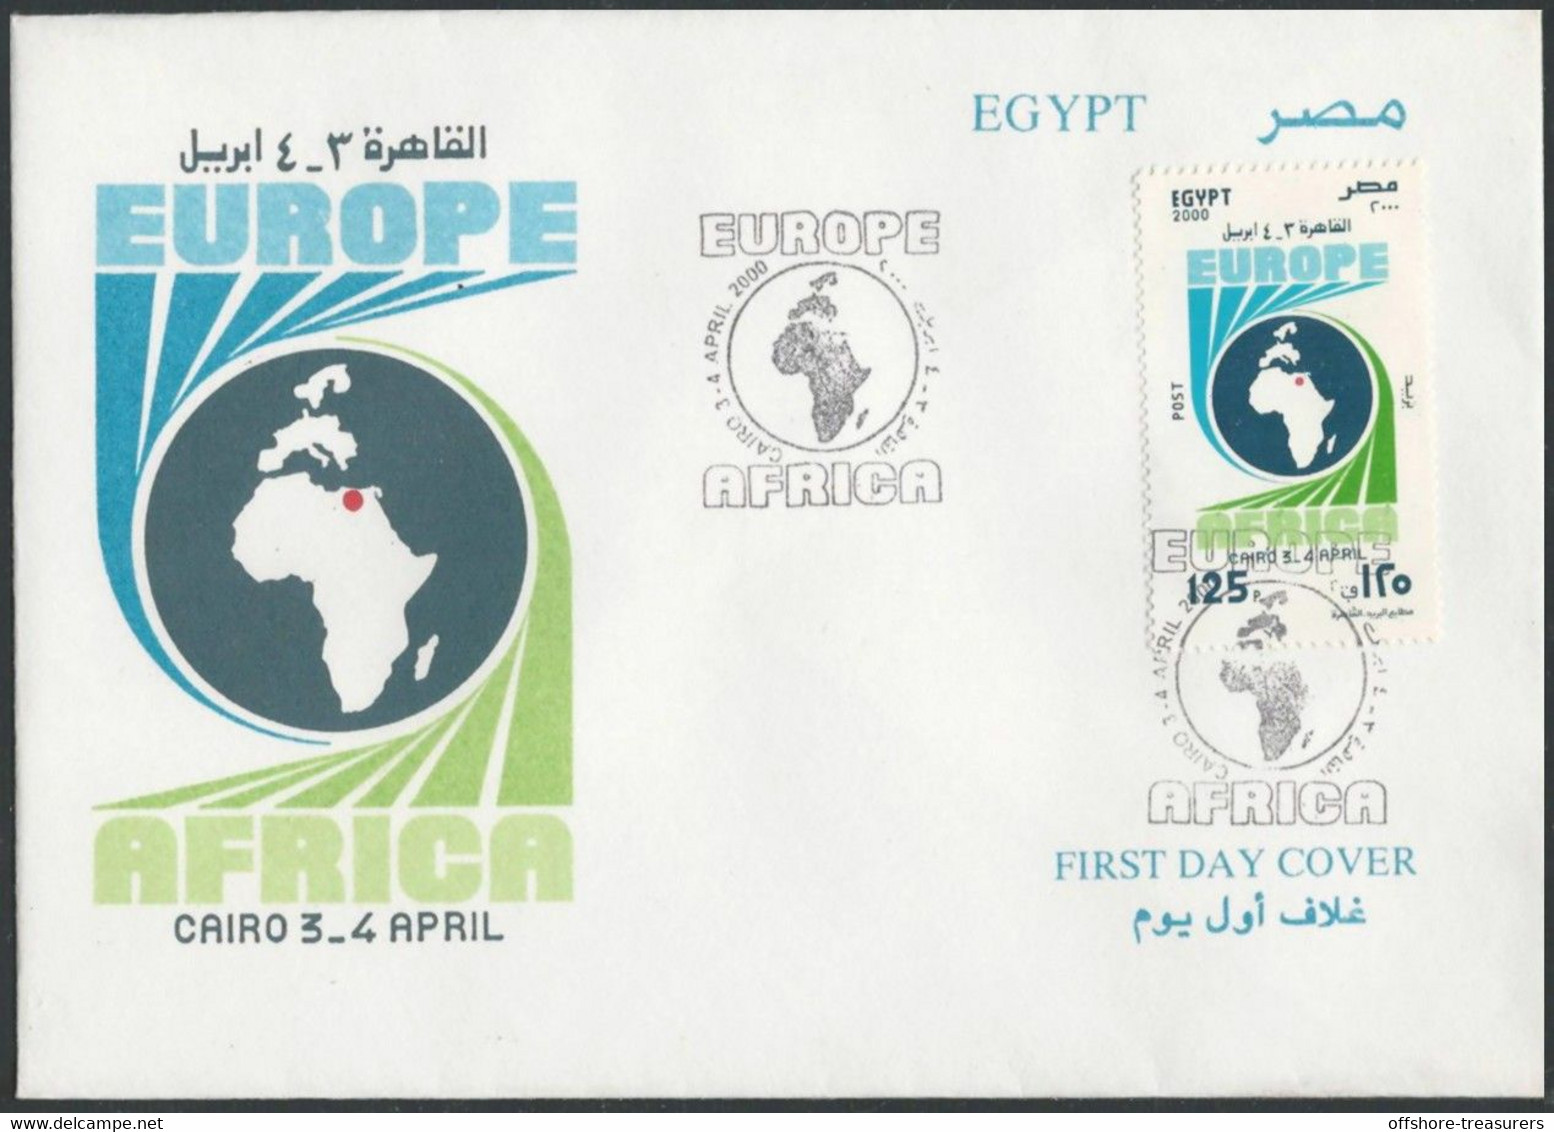 Egypt FDC 2000  First Day Cover Africac-Europe EU Summit / Convention In Cairo 3-4 April 2000 - Briefe U. Dokumente